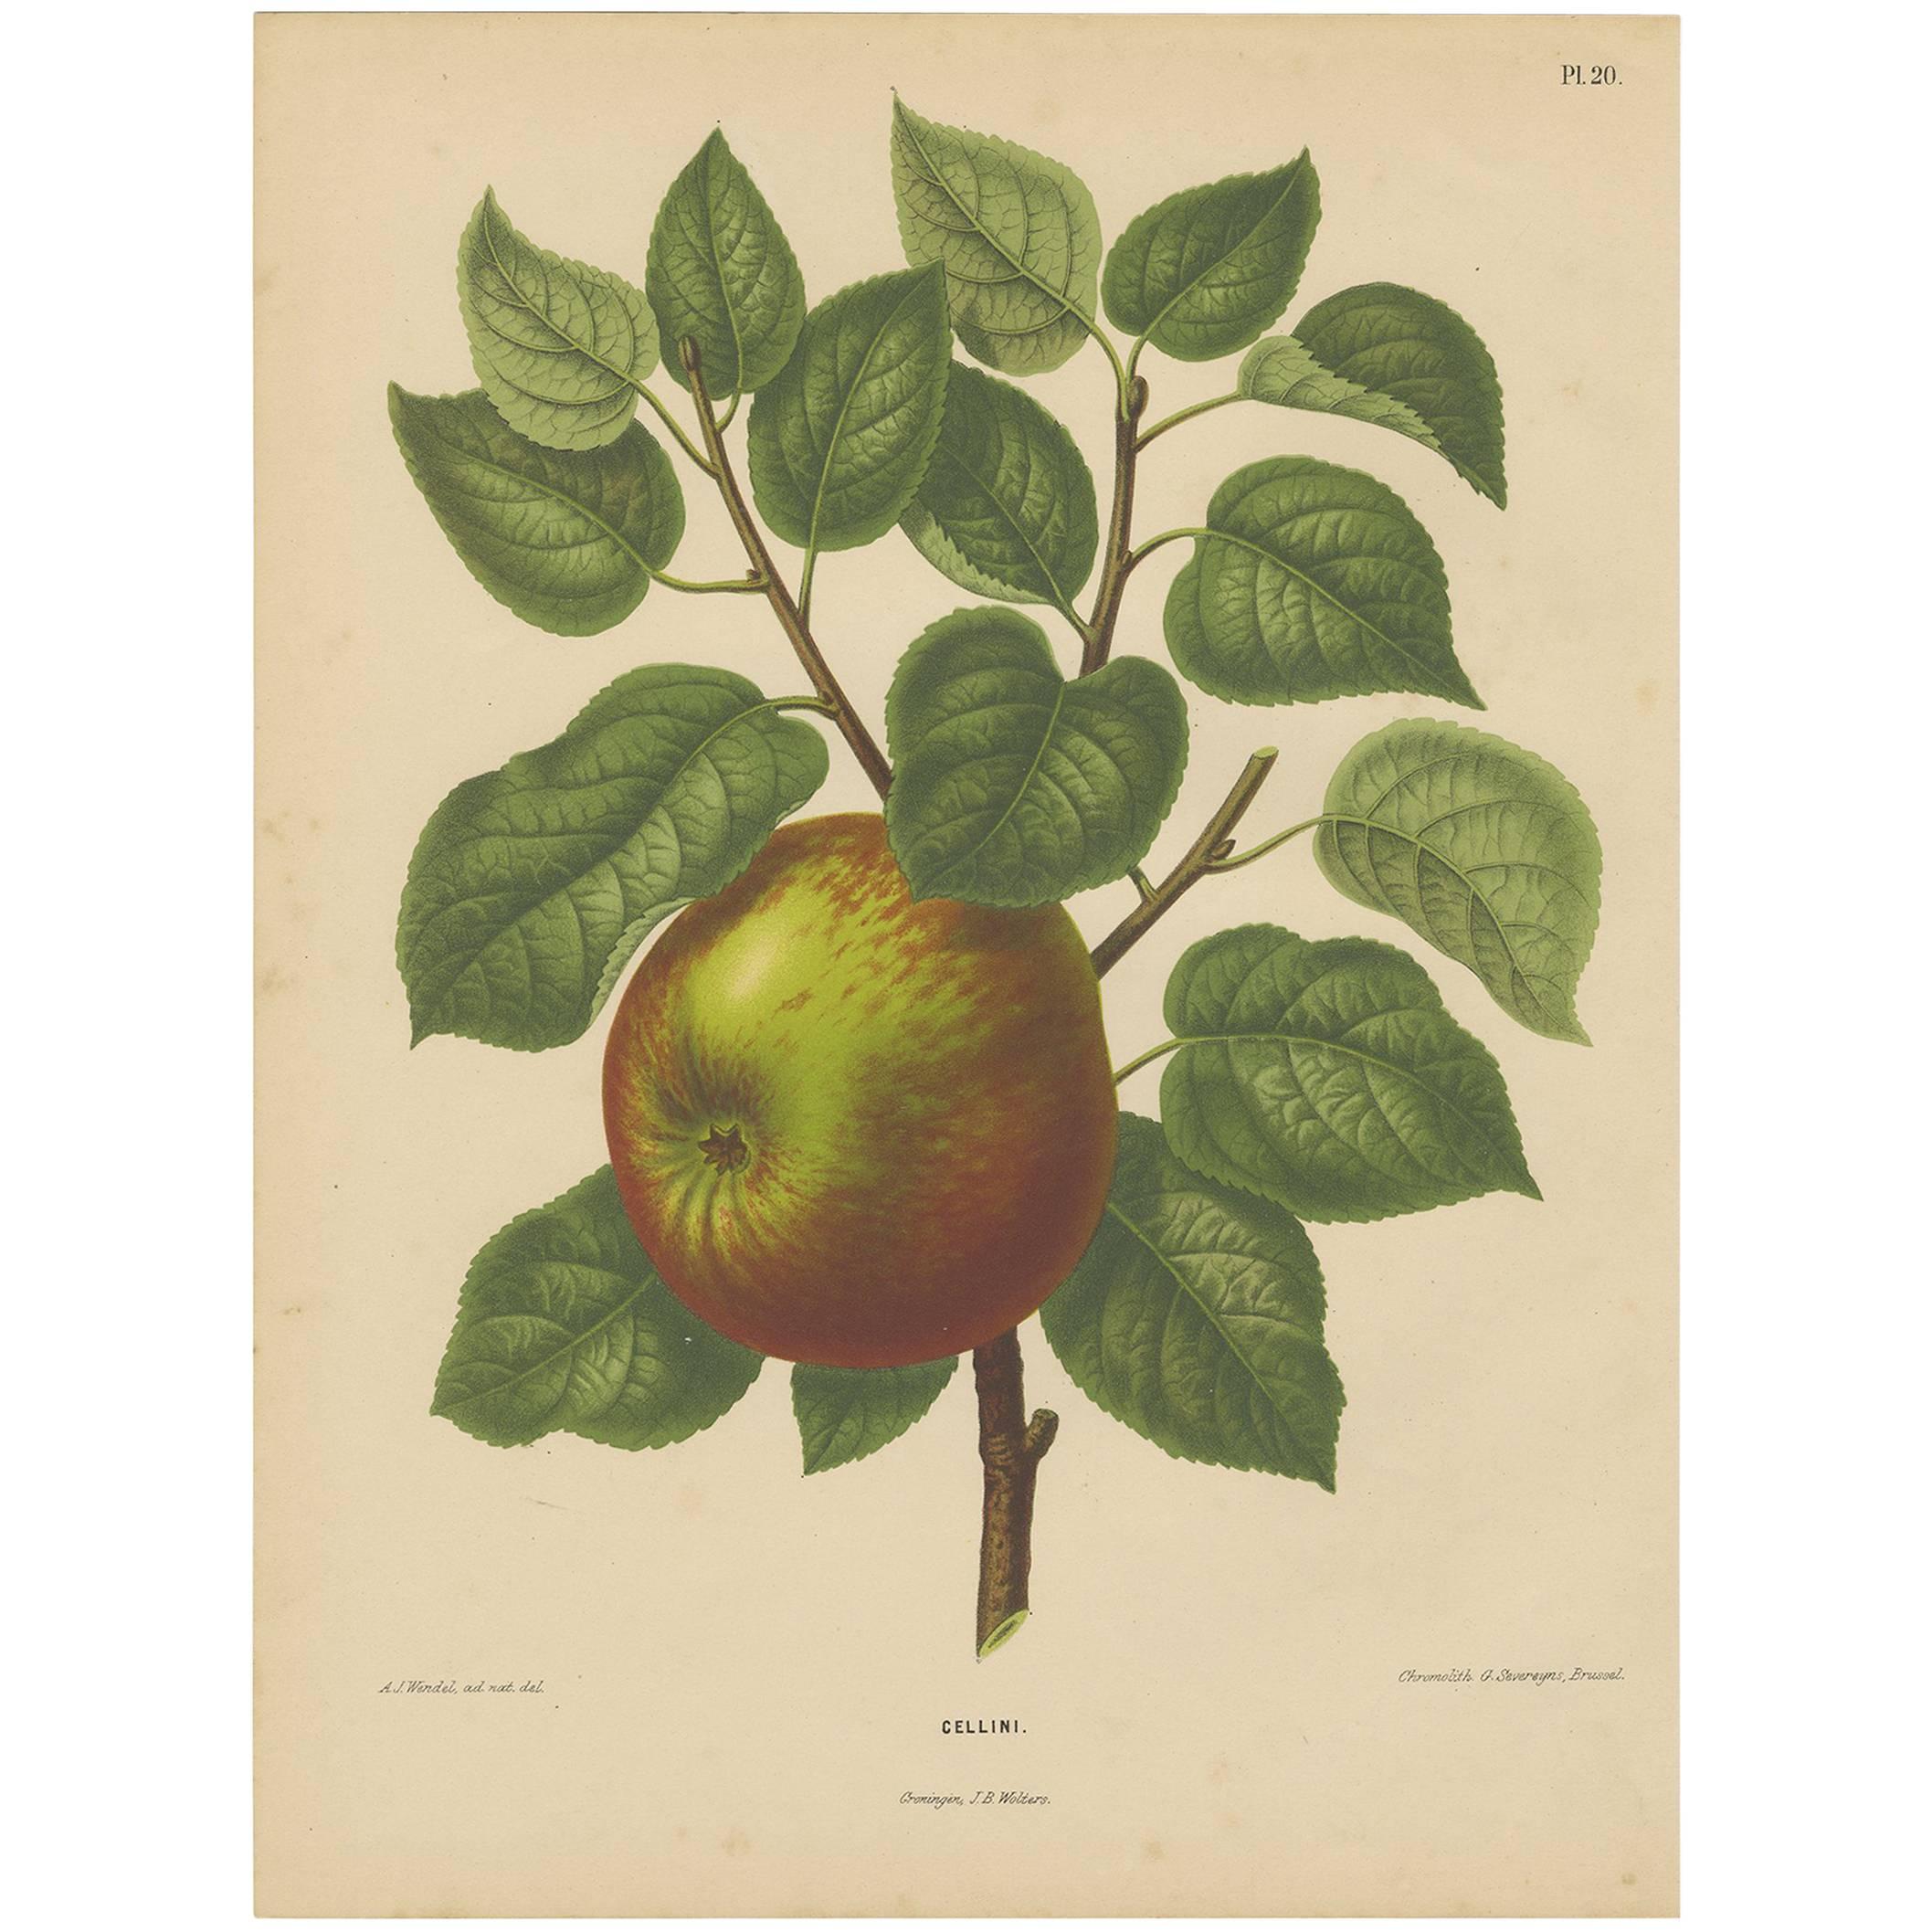 Antique Print of a Cellini Apple by G. Severeyns, 1876